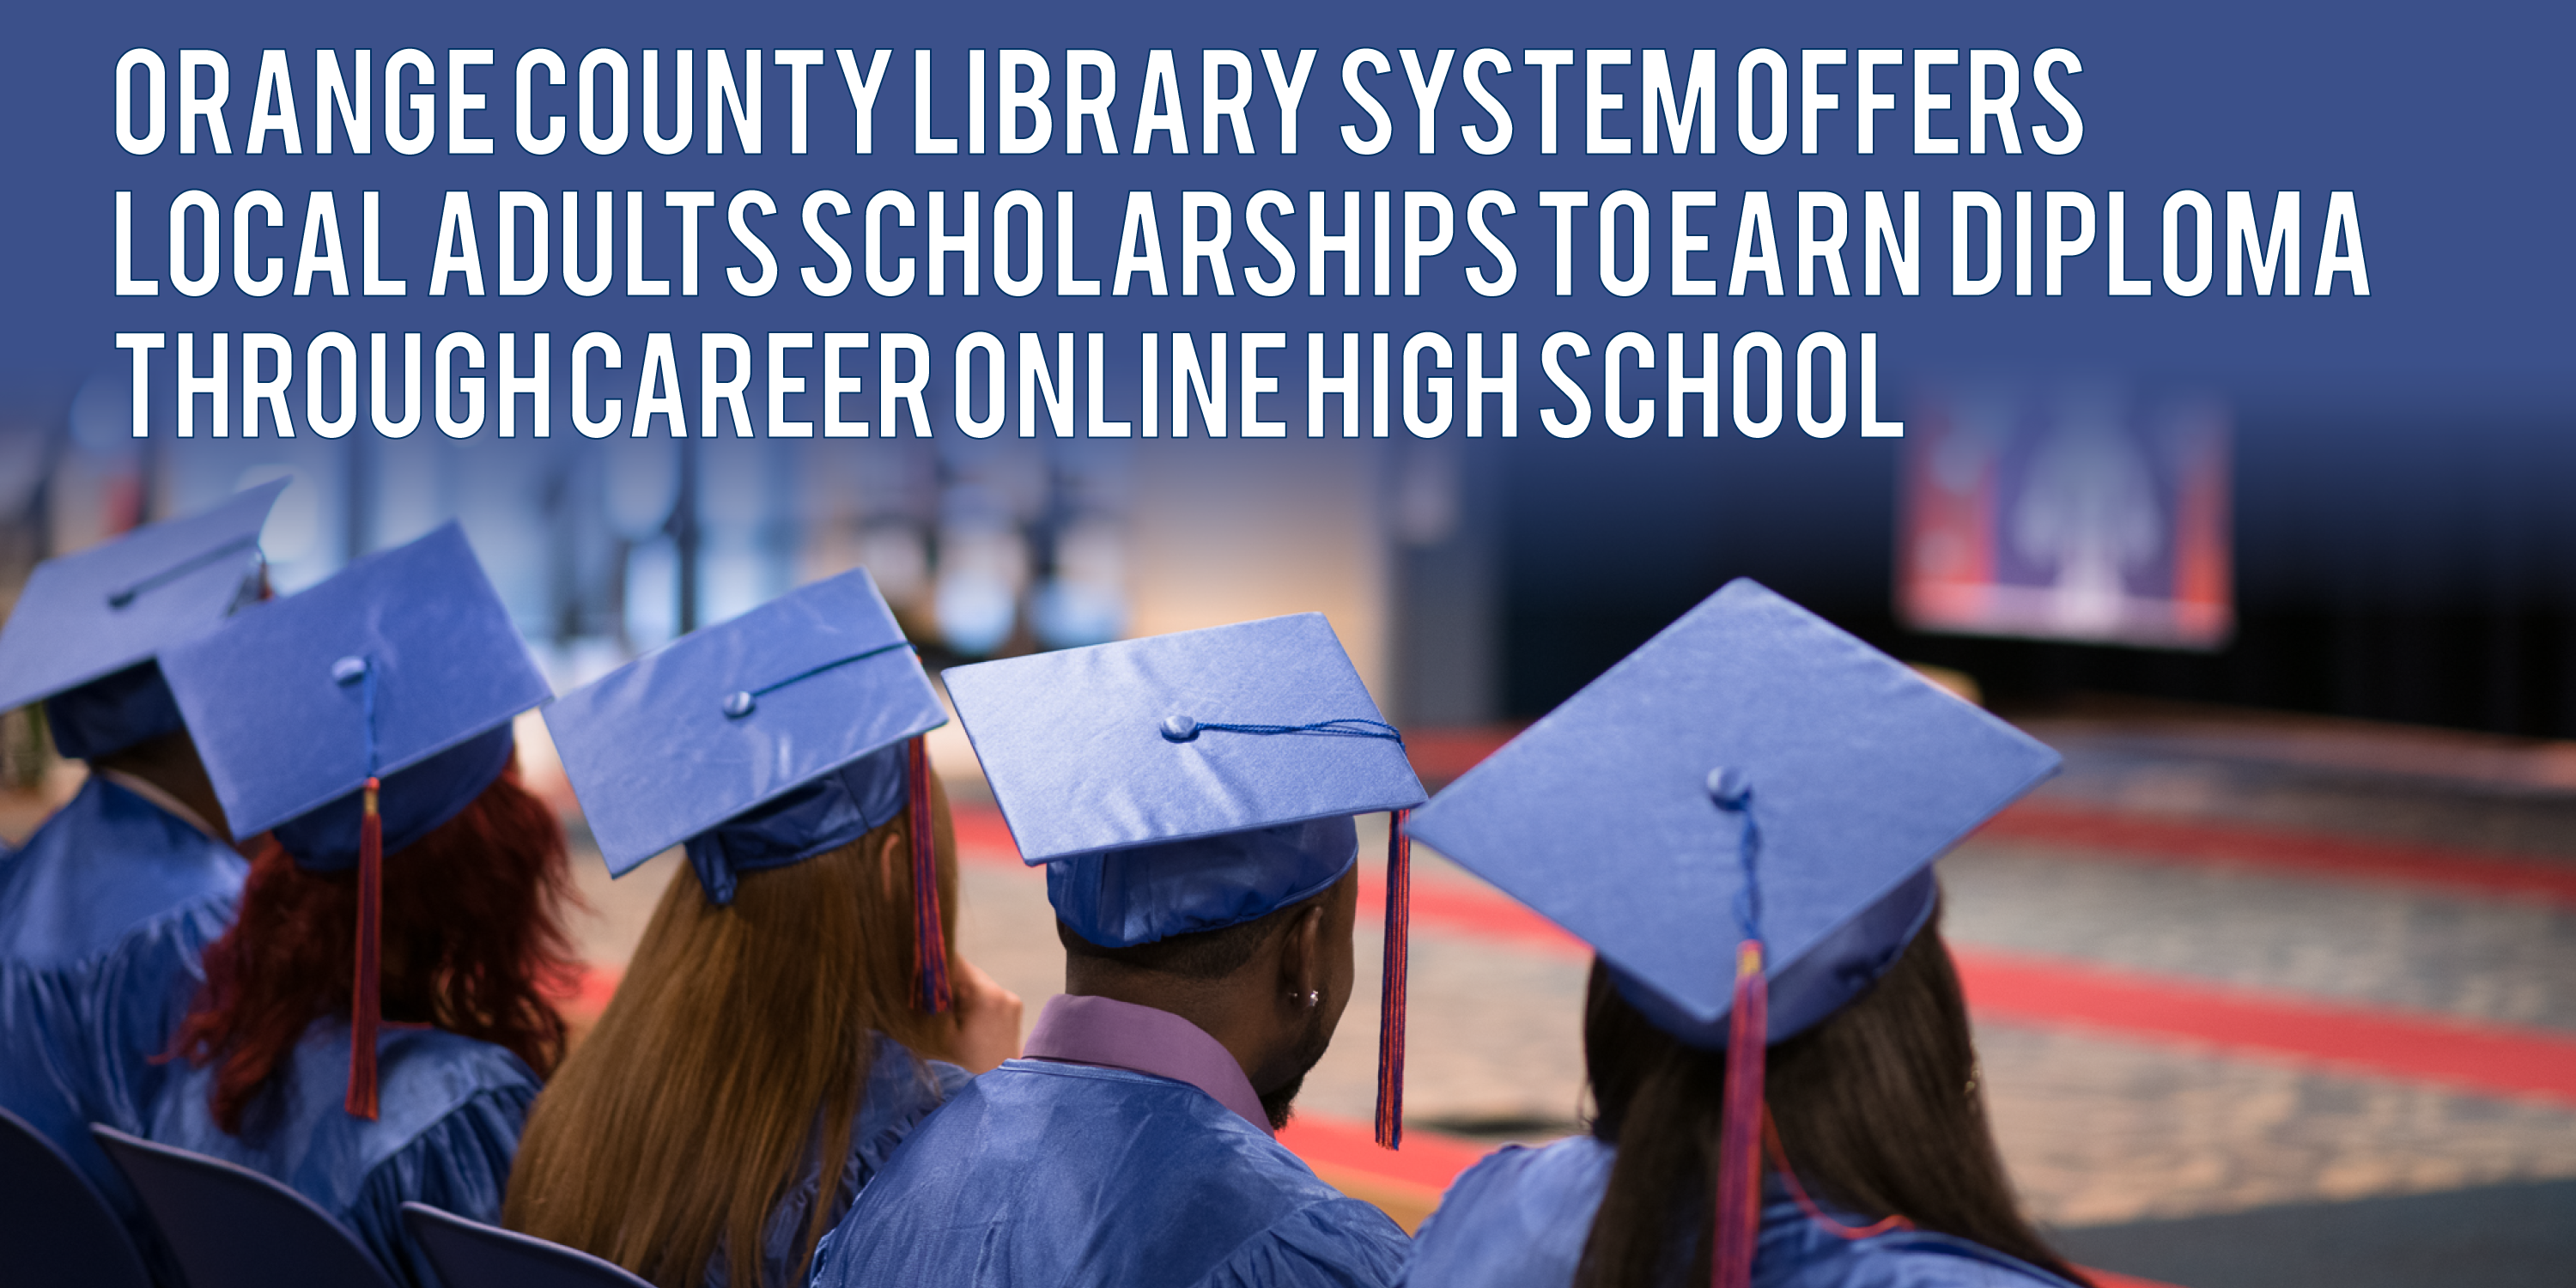 Orange County Library System Offers Local Adults Scholarships to Earn Diploma Through Career Online High School